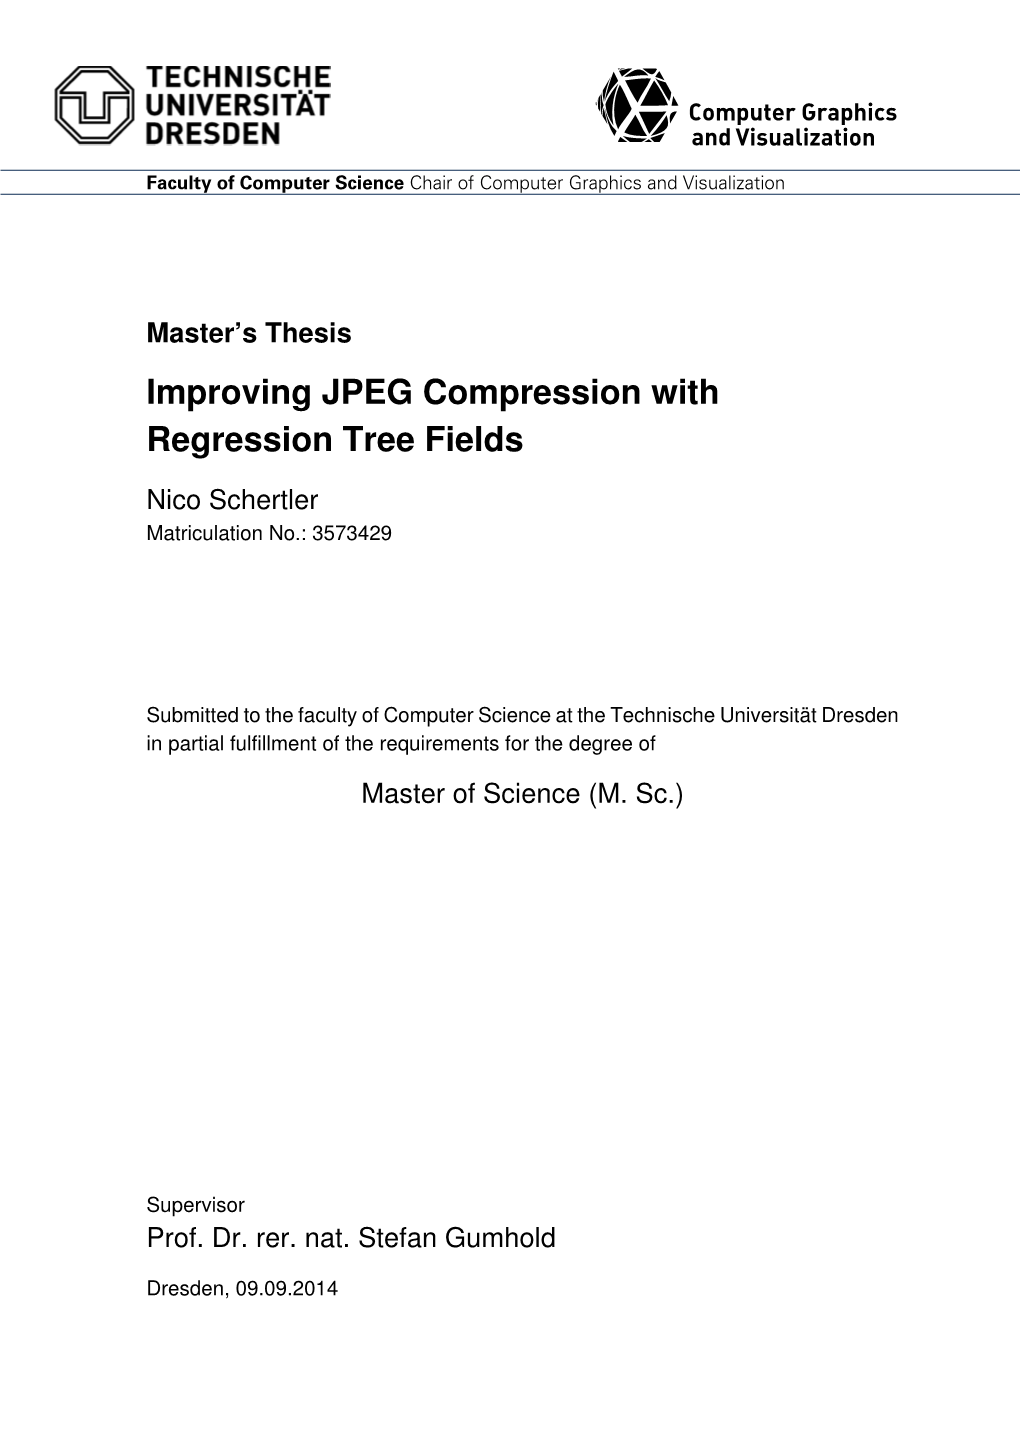 Improving JPEG Compression with Regression Tree Fields